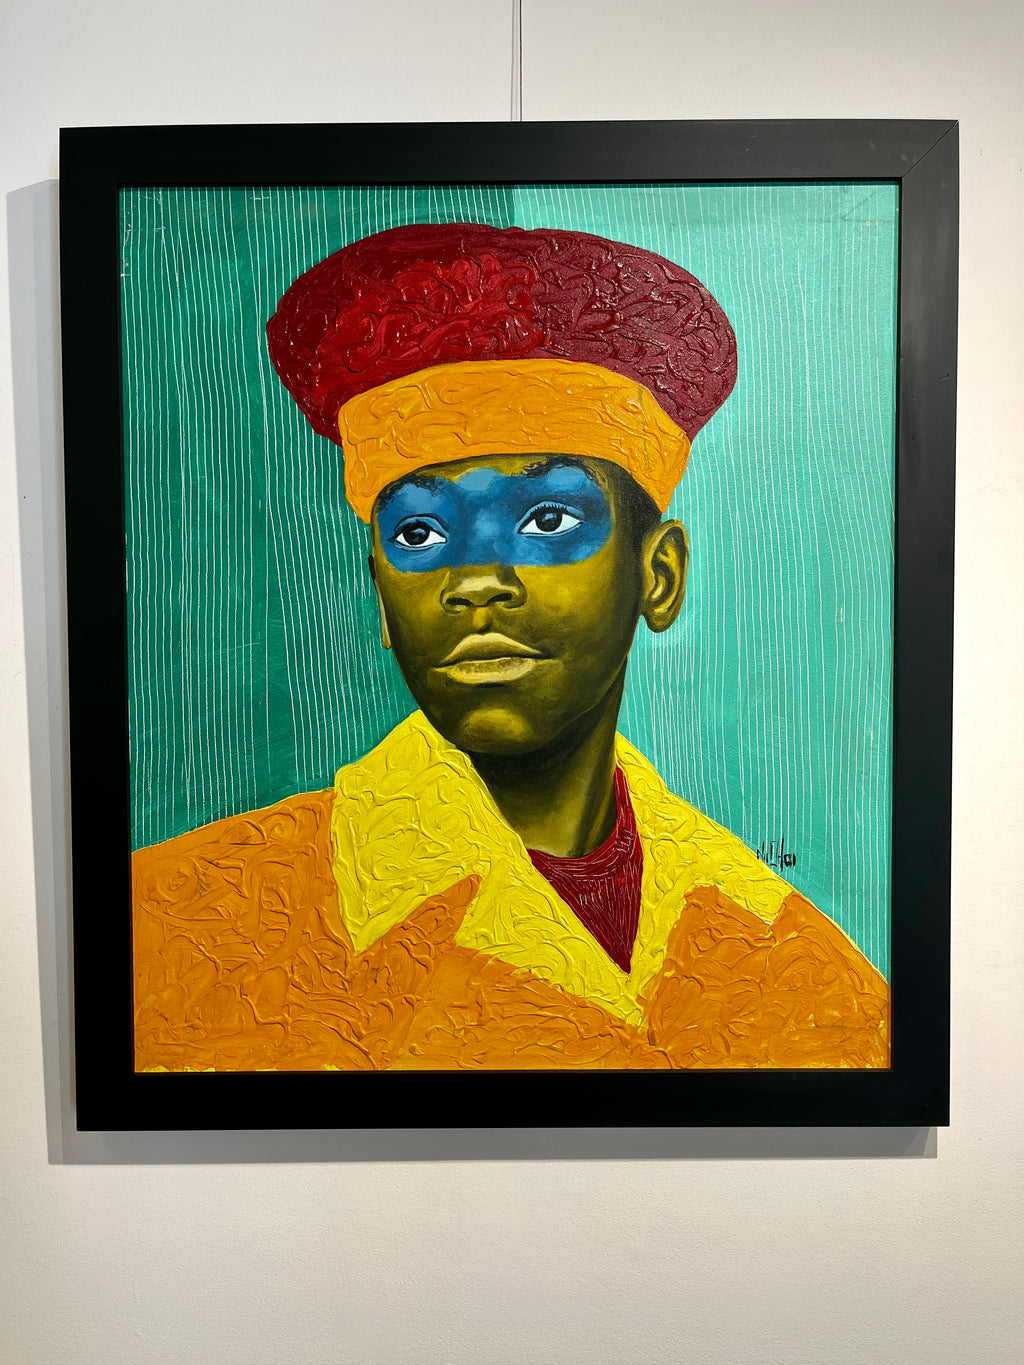 acrylic painting of an African boy with red and orange hat and green background